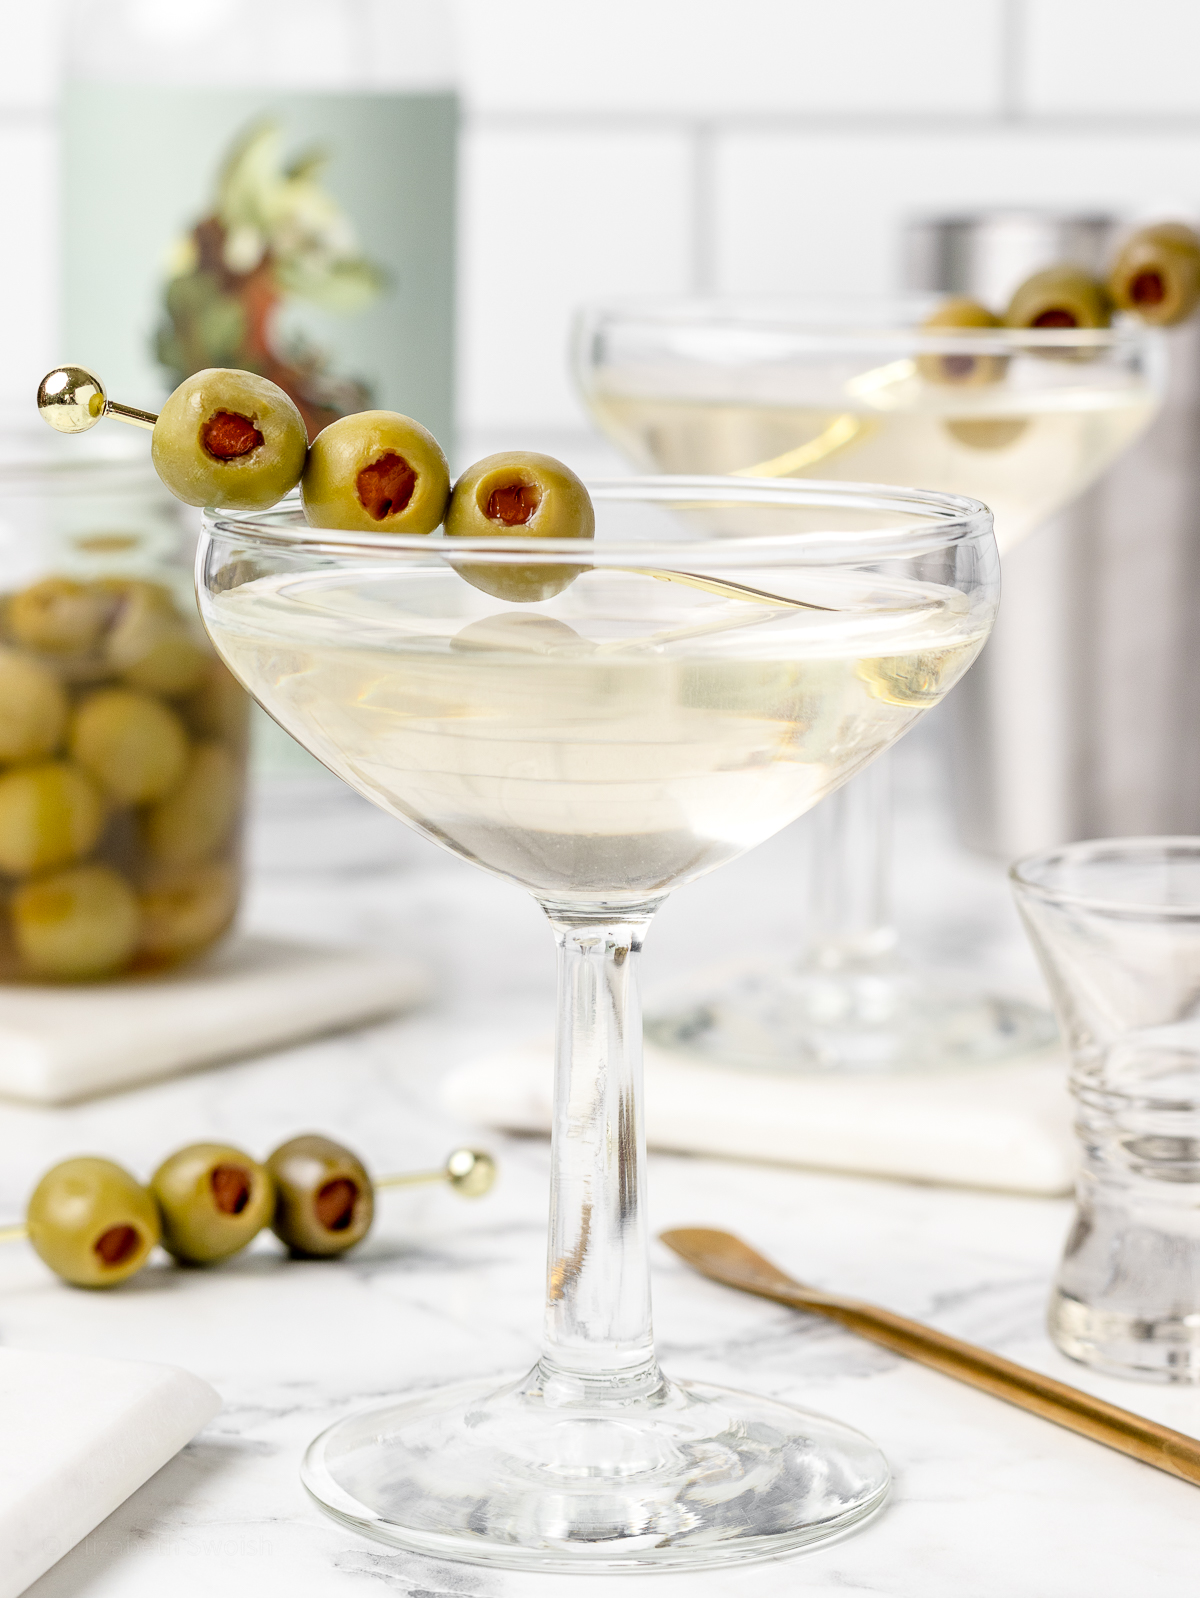 Close up of 3 olives on a cocktail pin garnishing the mocktail.